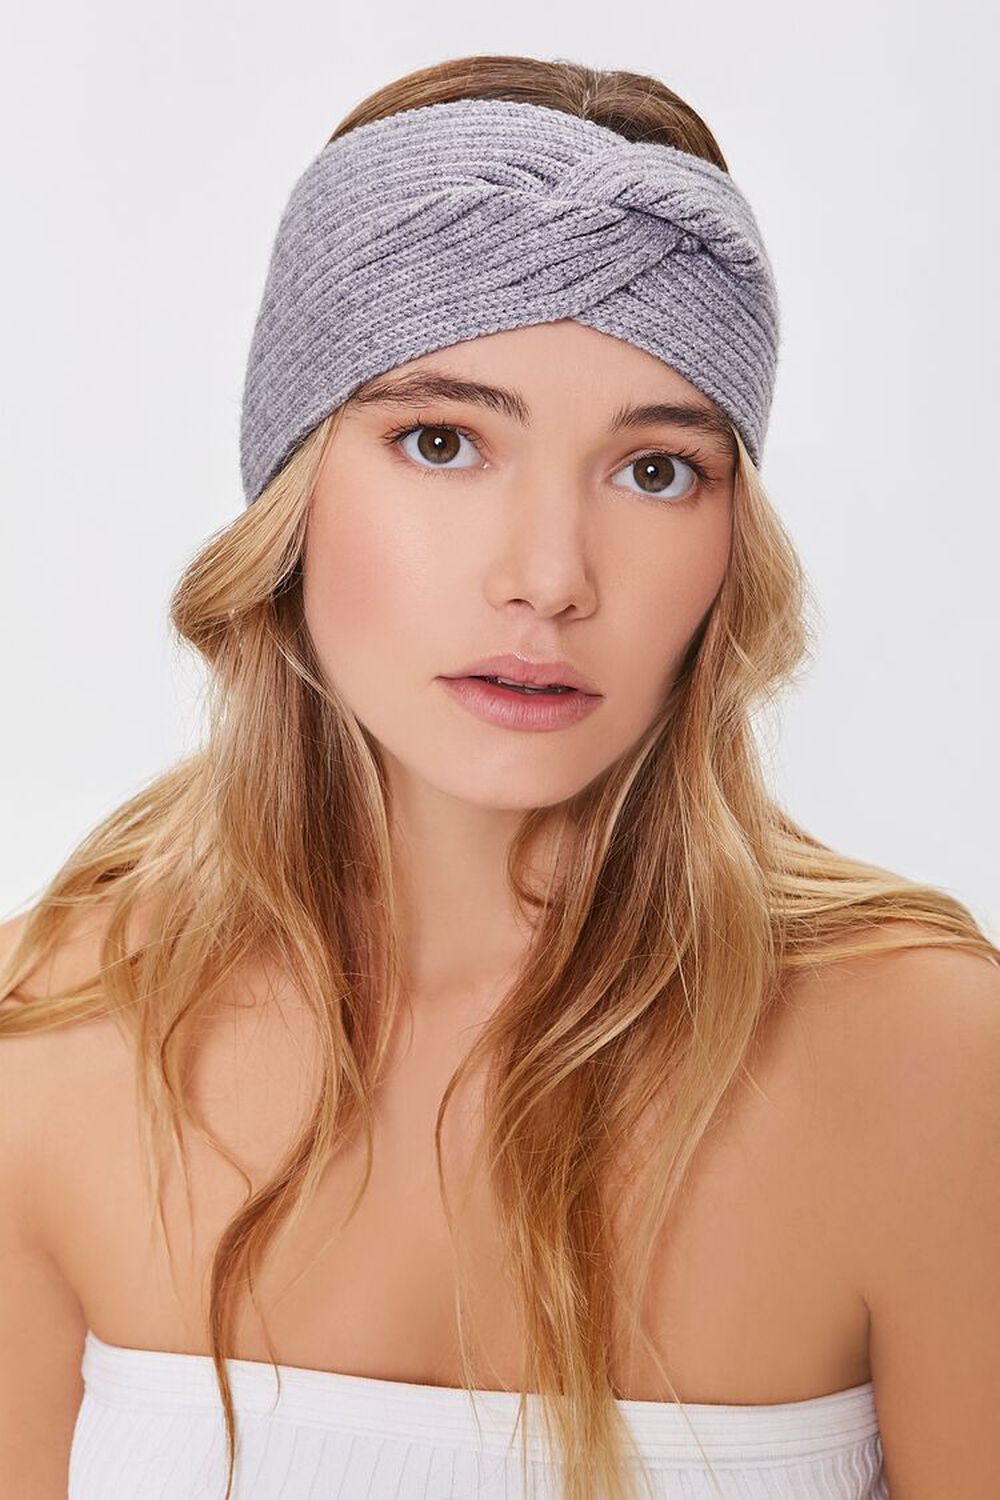 HEATHER GREY Ribbed Twisted Headwrap, image 1